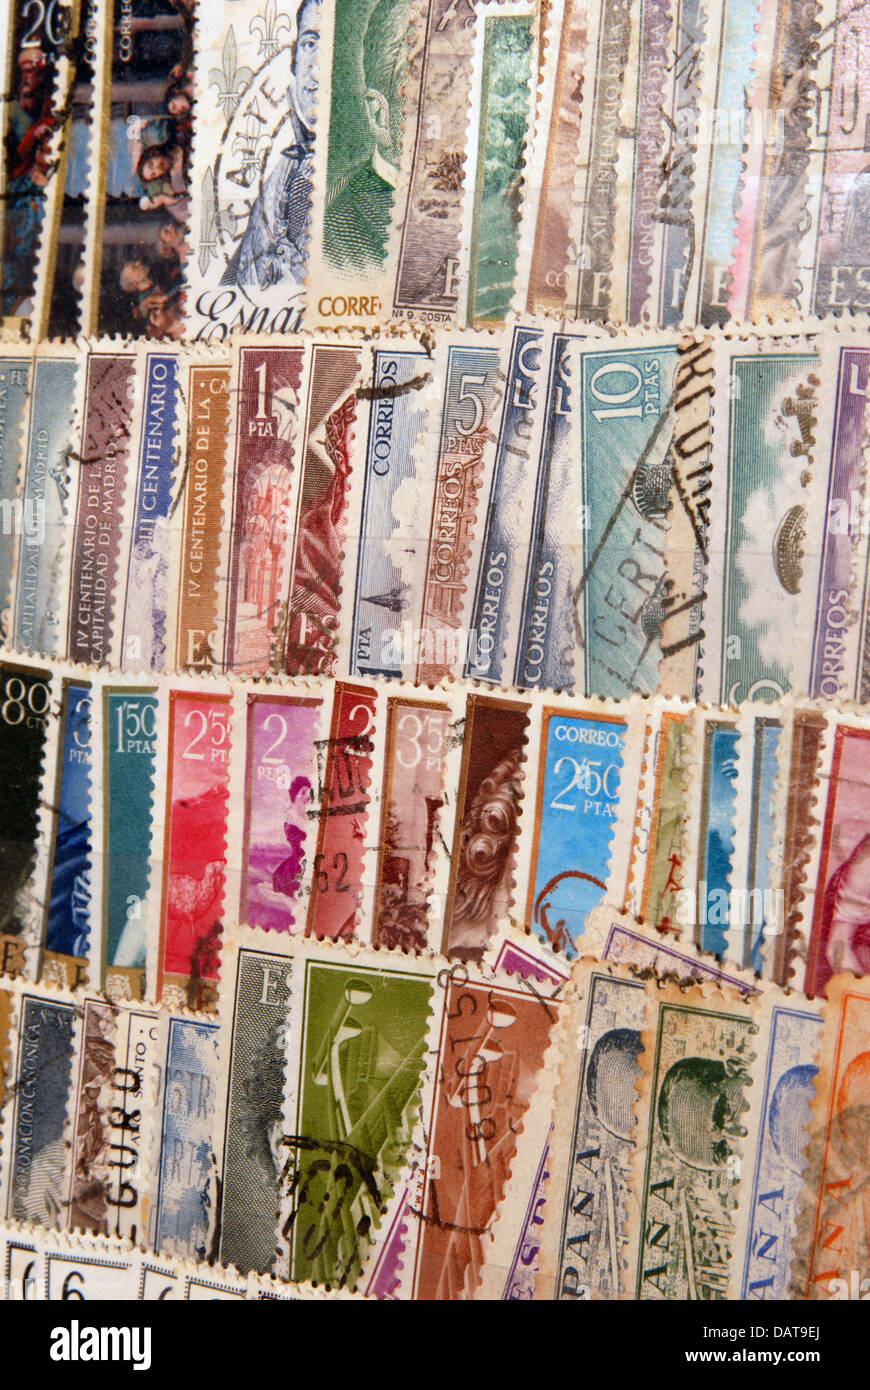 Old stamp collection from Spain Stock Photo